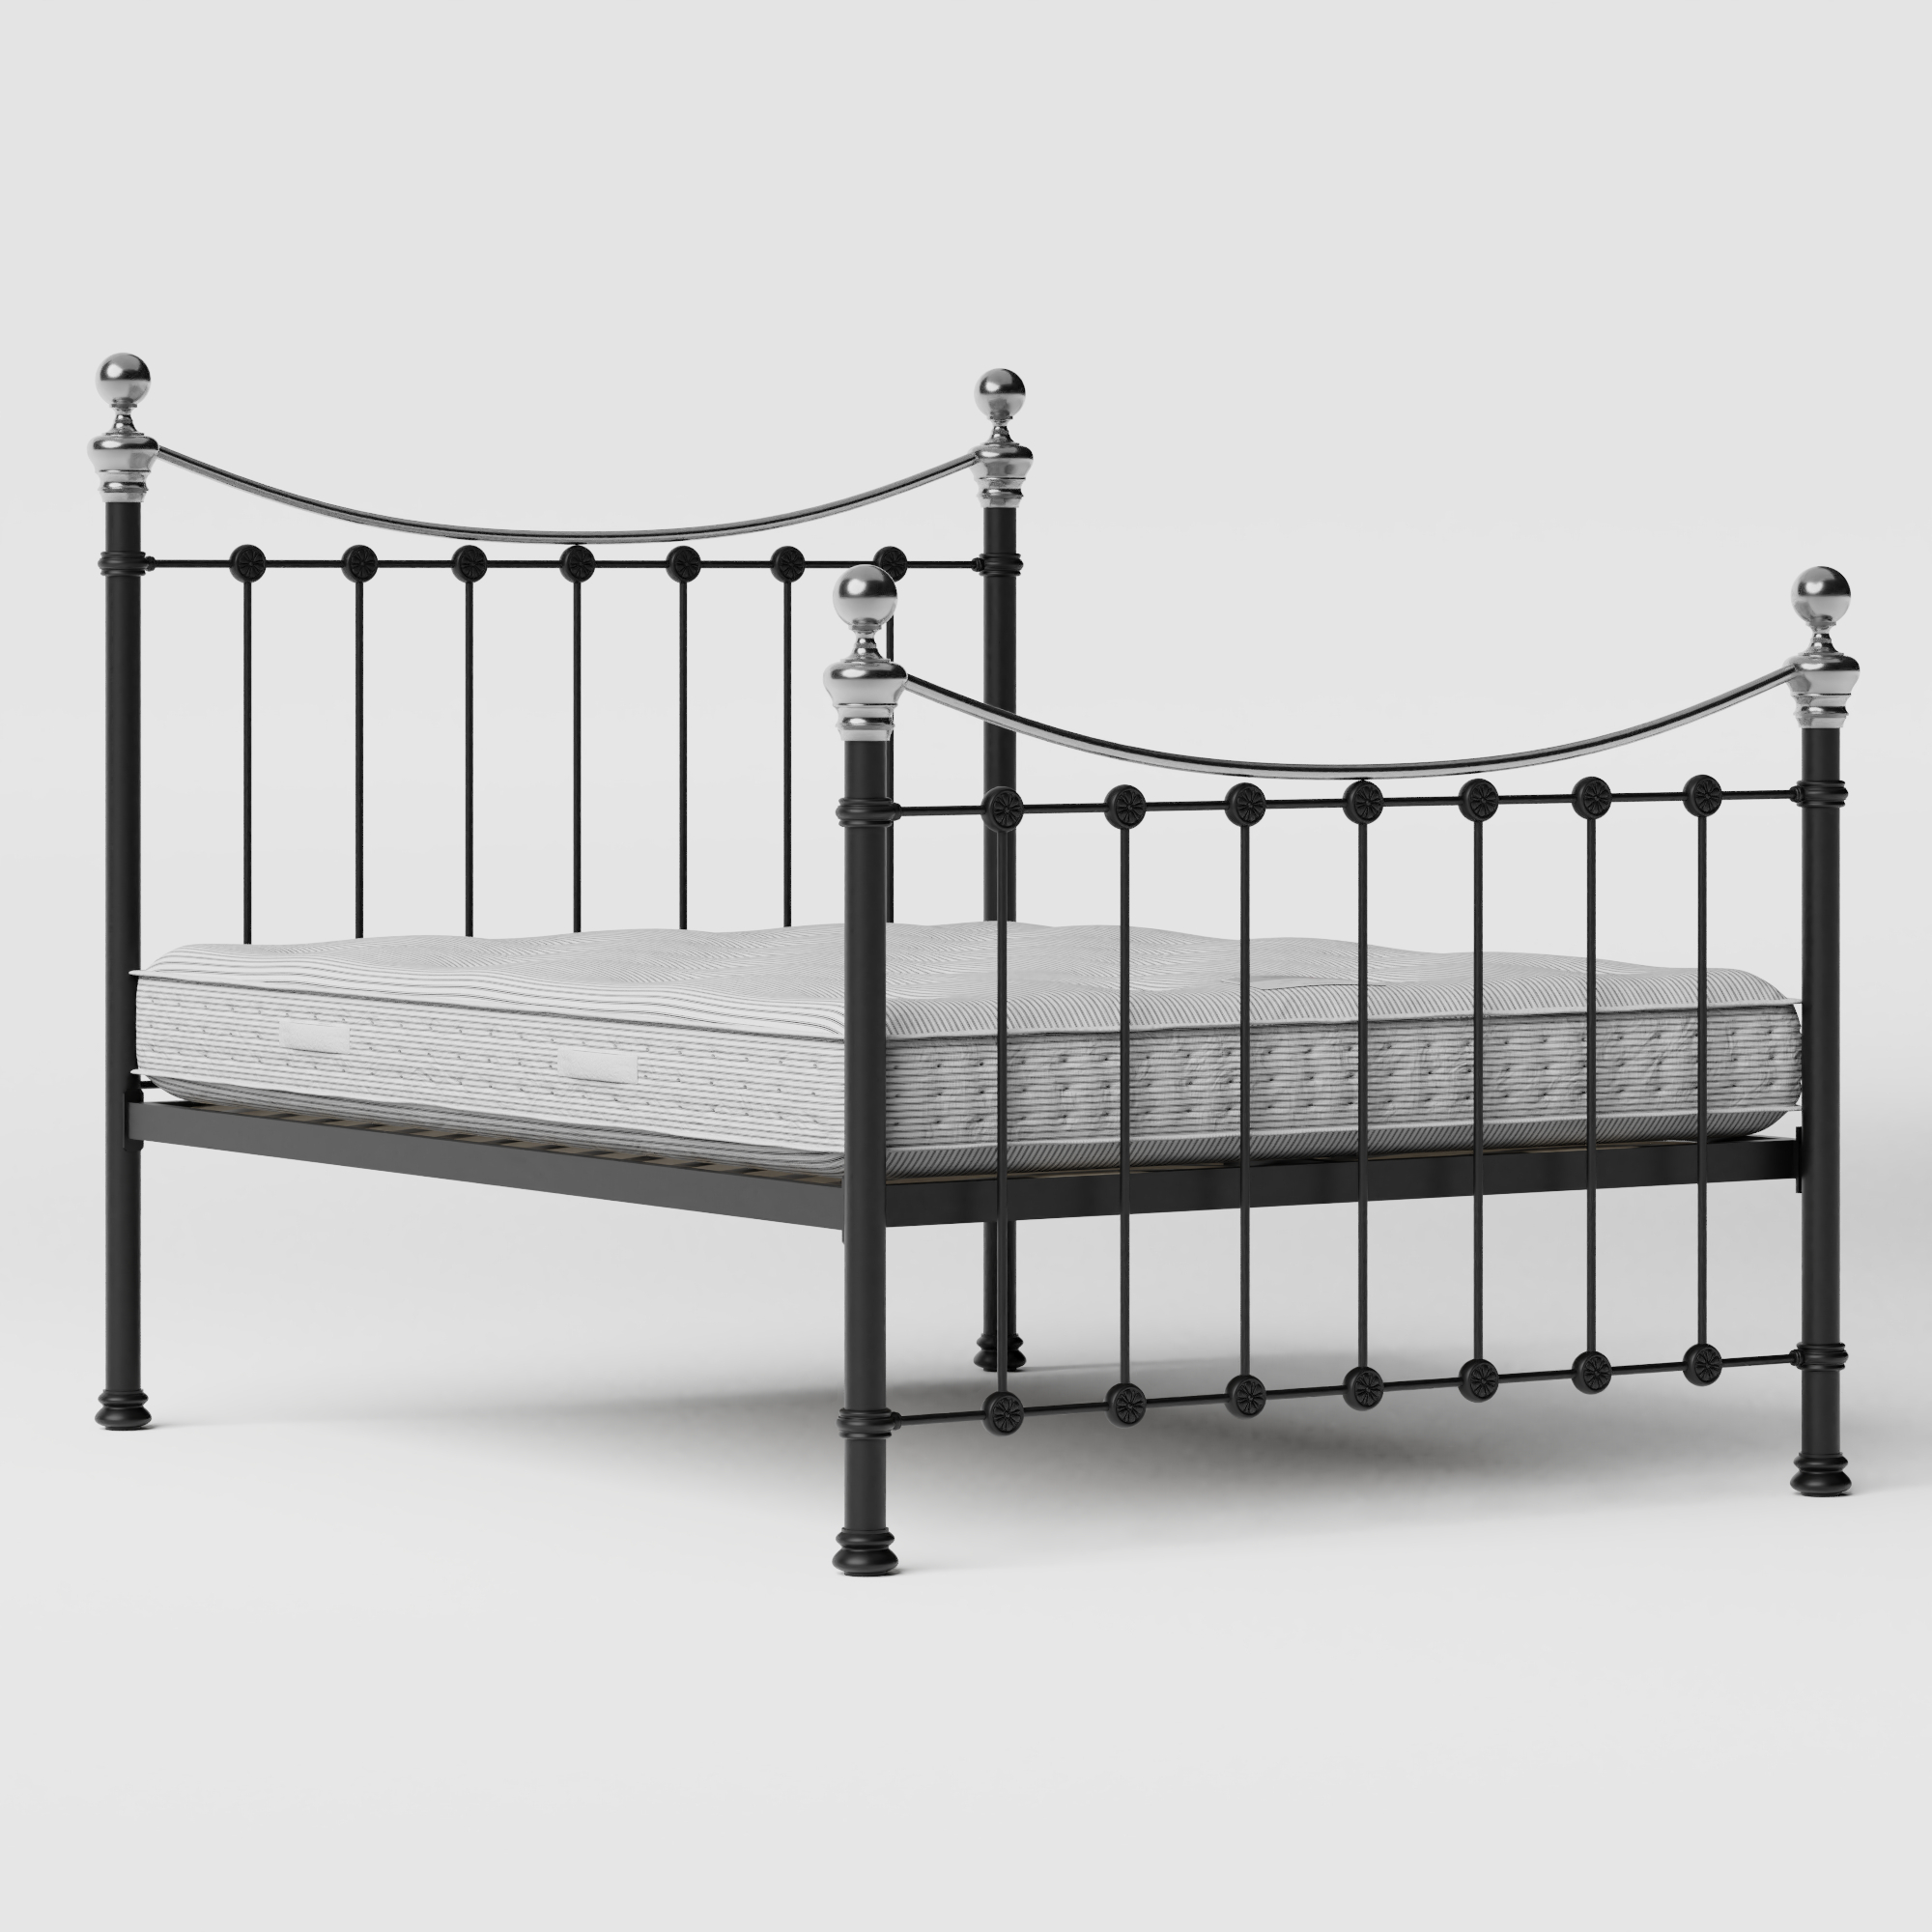 Selkirk Chromo iron/metal bed in black with Juno mattress